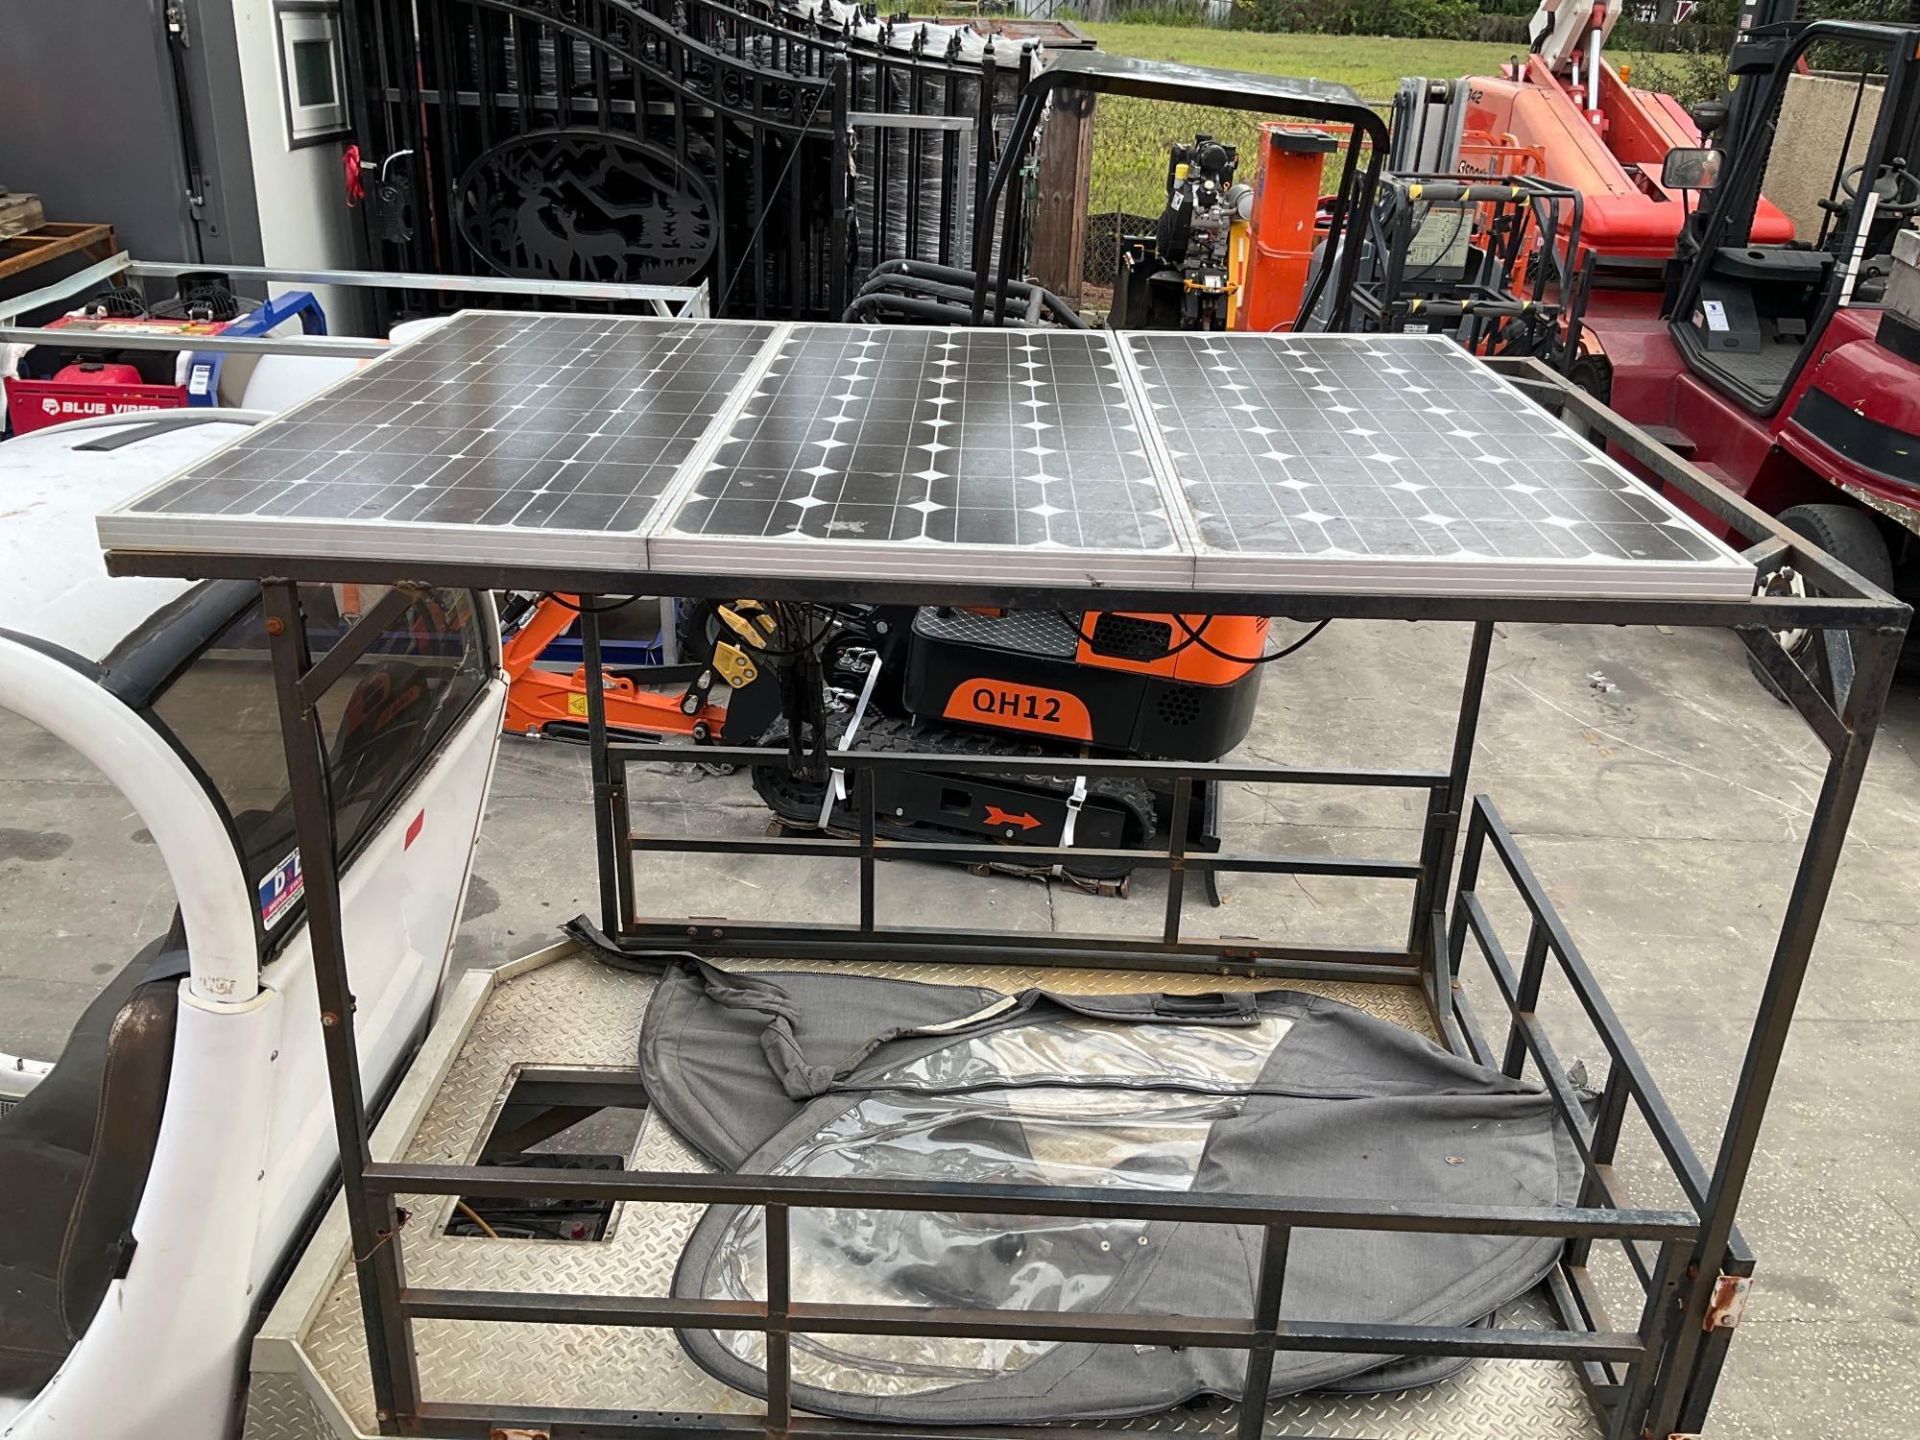 GEM CART, ELECTRIC, SOLAR PANELS ATTACHED, BILL OF SALE ONLY, CONDITION UNKNOWN - Bild 10 aus 12